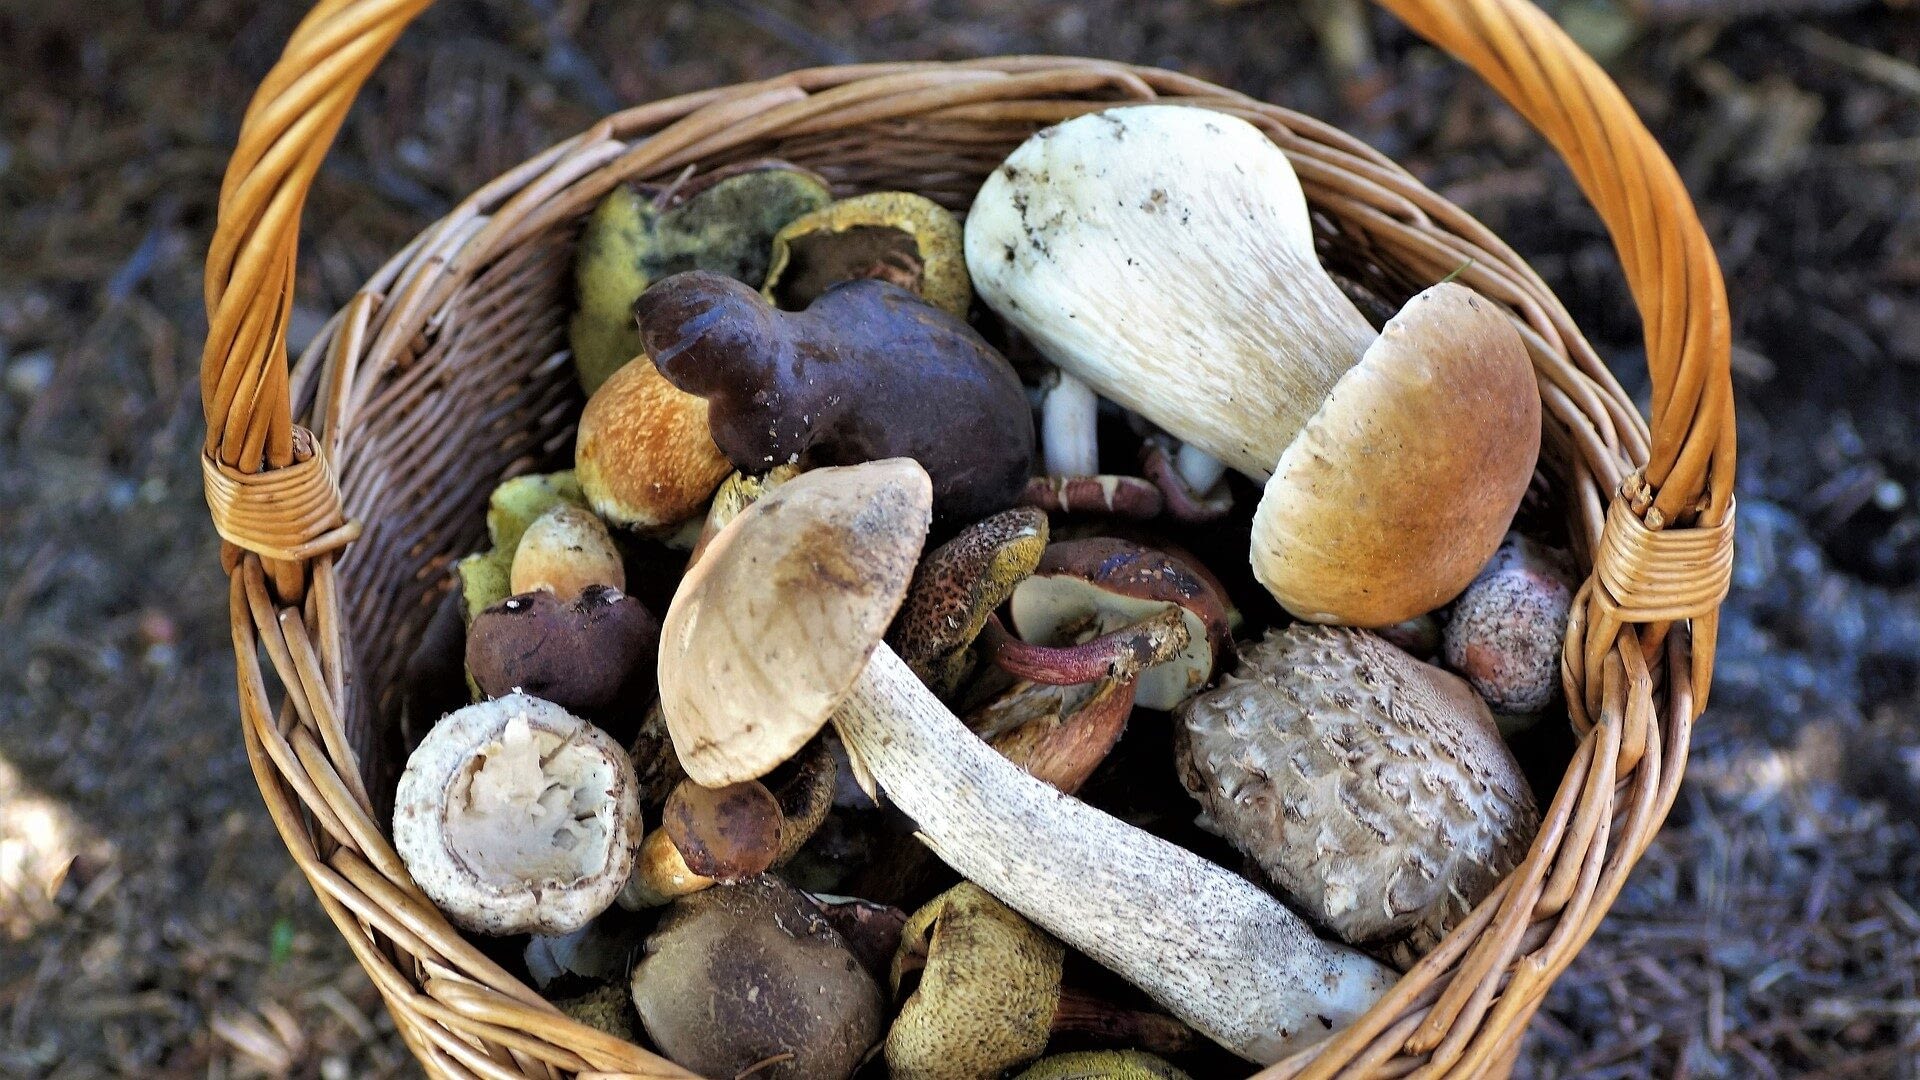 Image: a variety of wild-foraged mushrooms in a woven basket